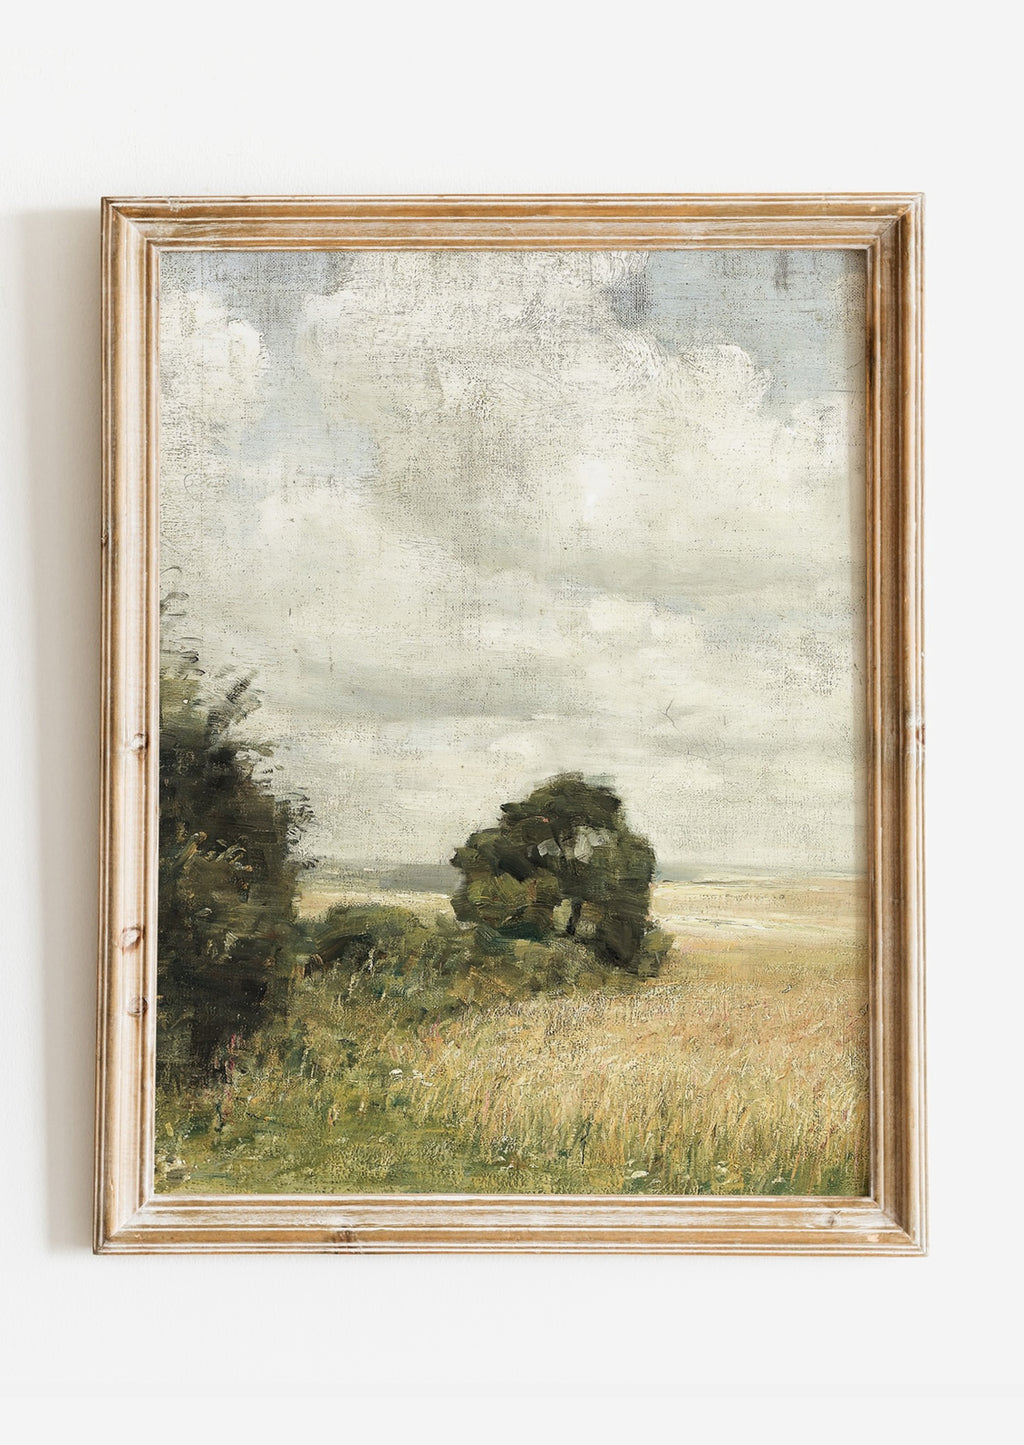 2: An antique inspired landscape art print of tree in wheat field.